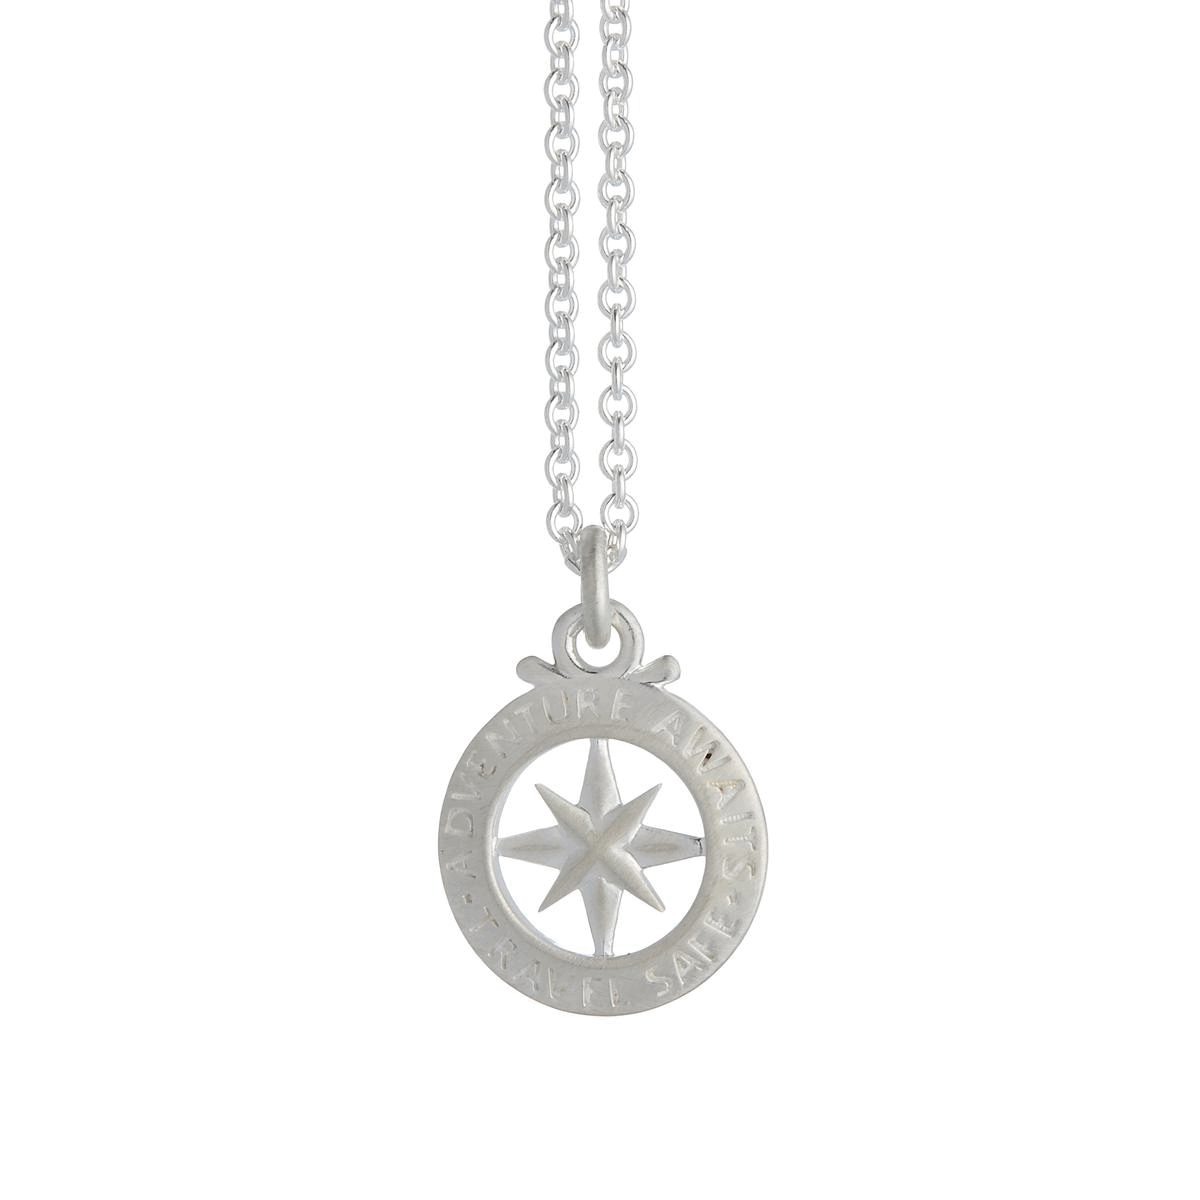 Small man's compass necklace alternative to a St Christopher travel gift from Off The Map Jewellery